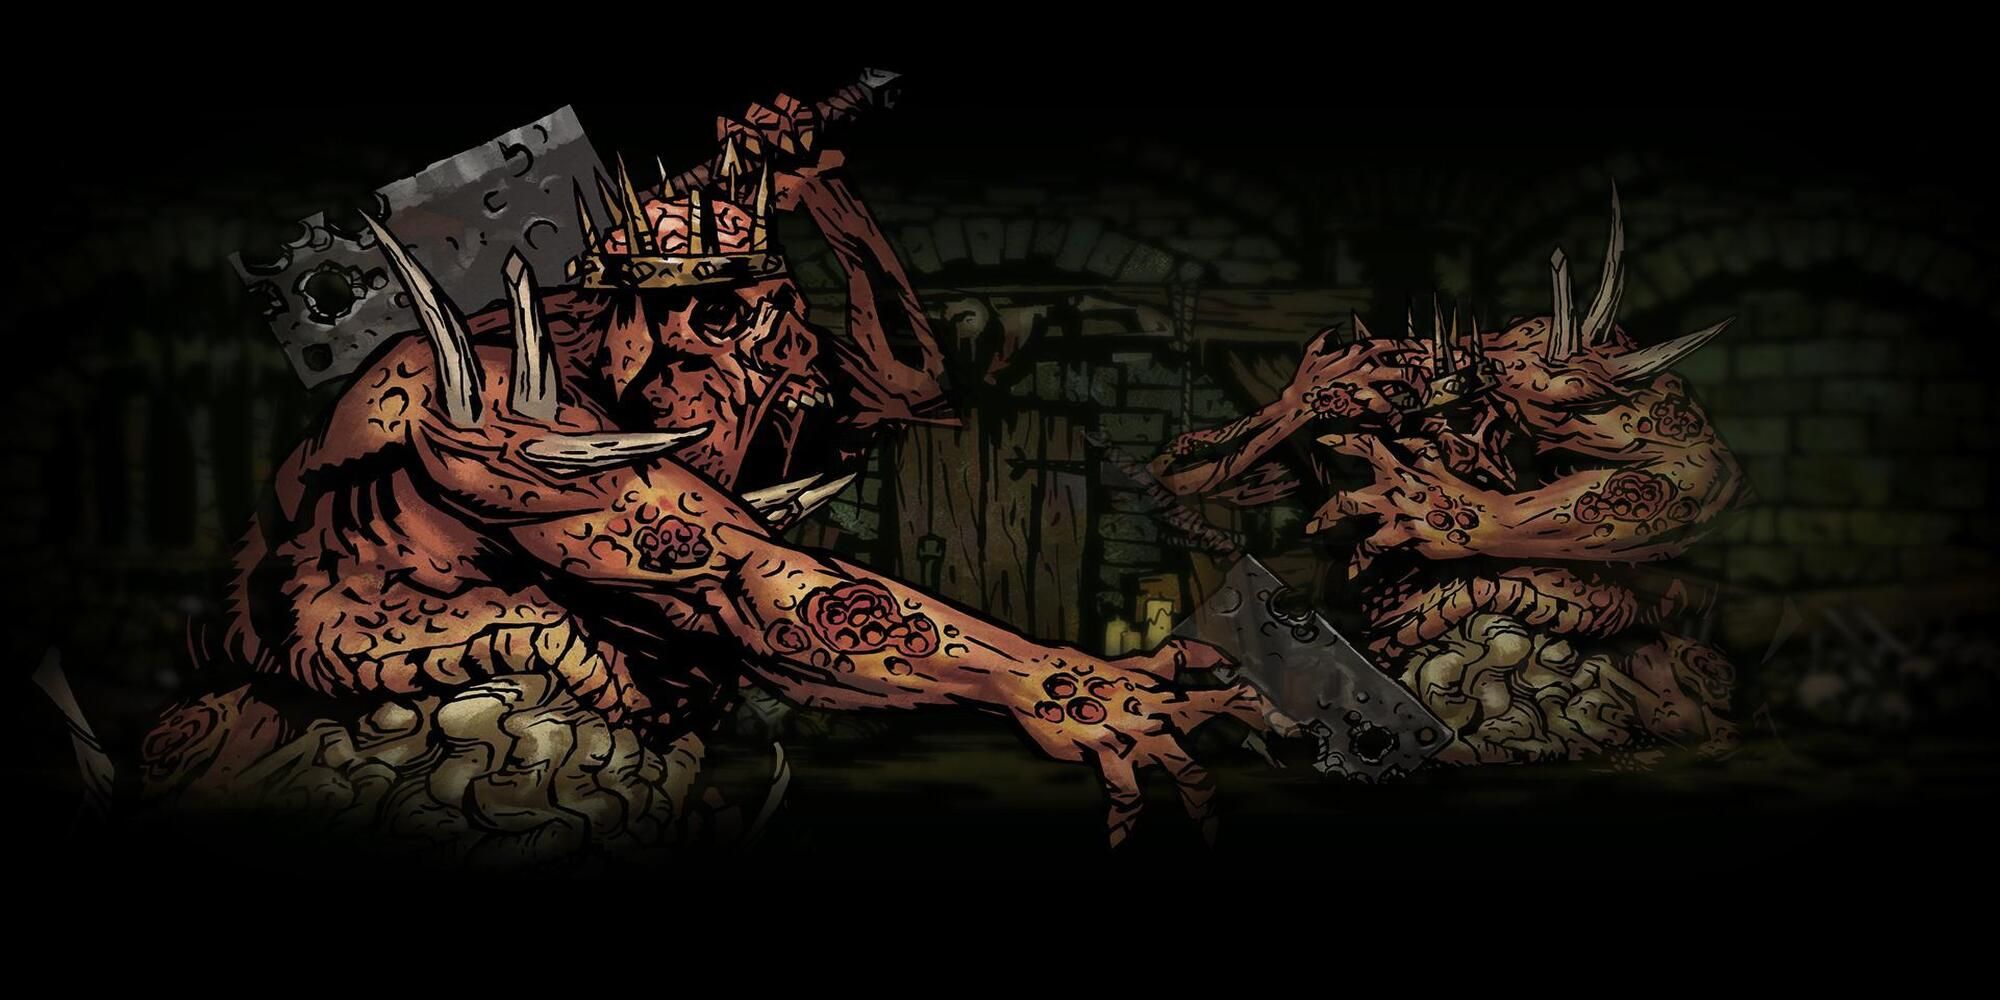 A wallpaper showing the Swine King attacking and defending itself.